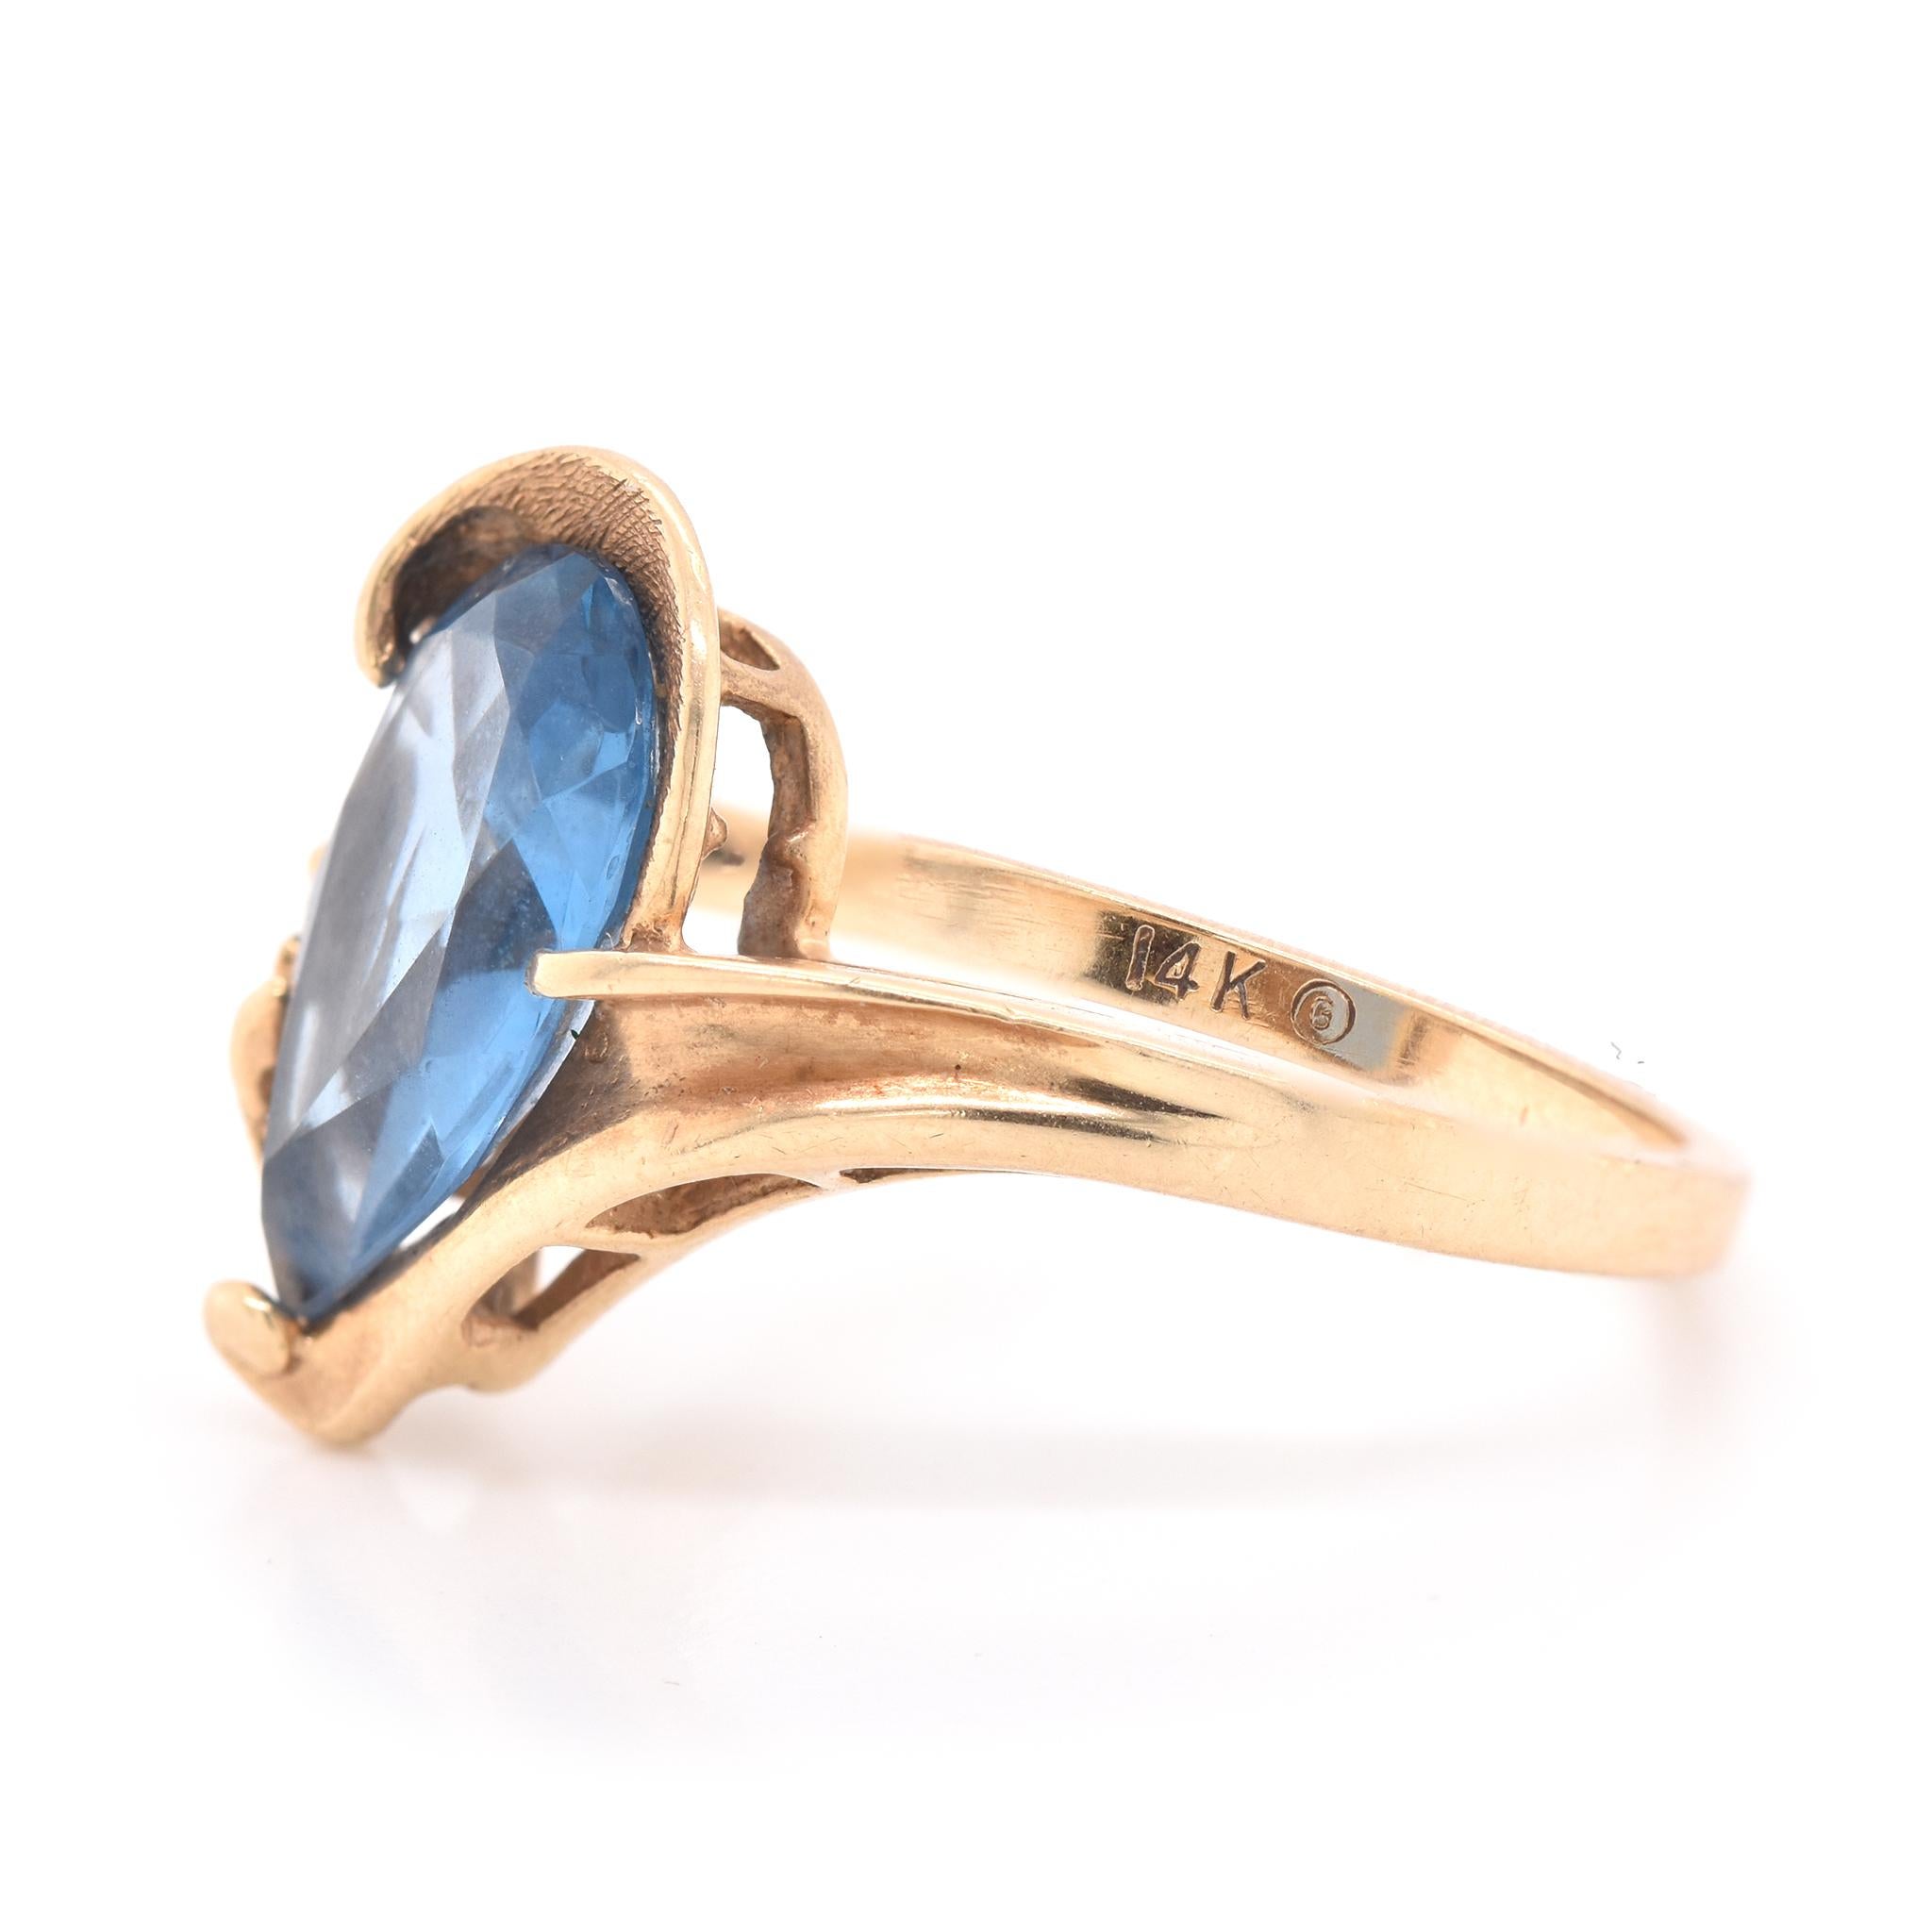 Designer: custom designed
Material: 14K yellow gold
Gemstone: Blue Topaz = 2.54ct Pear cut
Diamond: 1 round brilliant cut = .015ct
Color: H
Clarity: SI2
Ring Size: 7 (please allow up to 2 additional business days for sizing requests)
Dimensions: